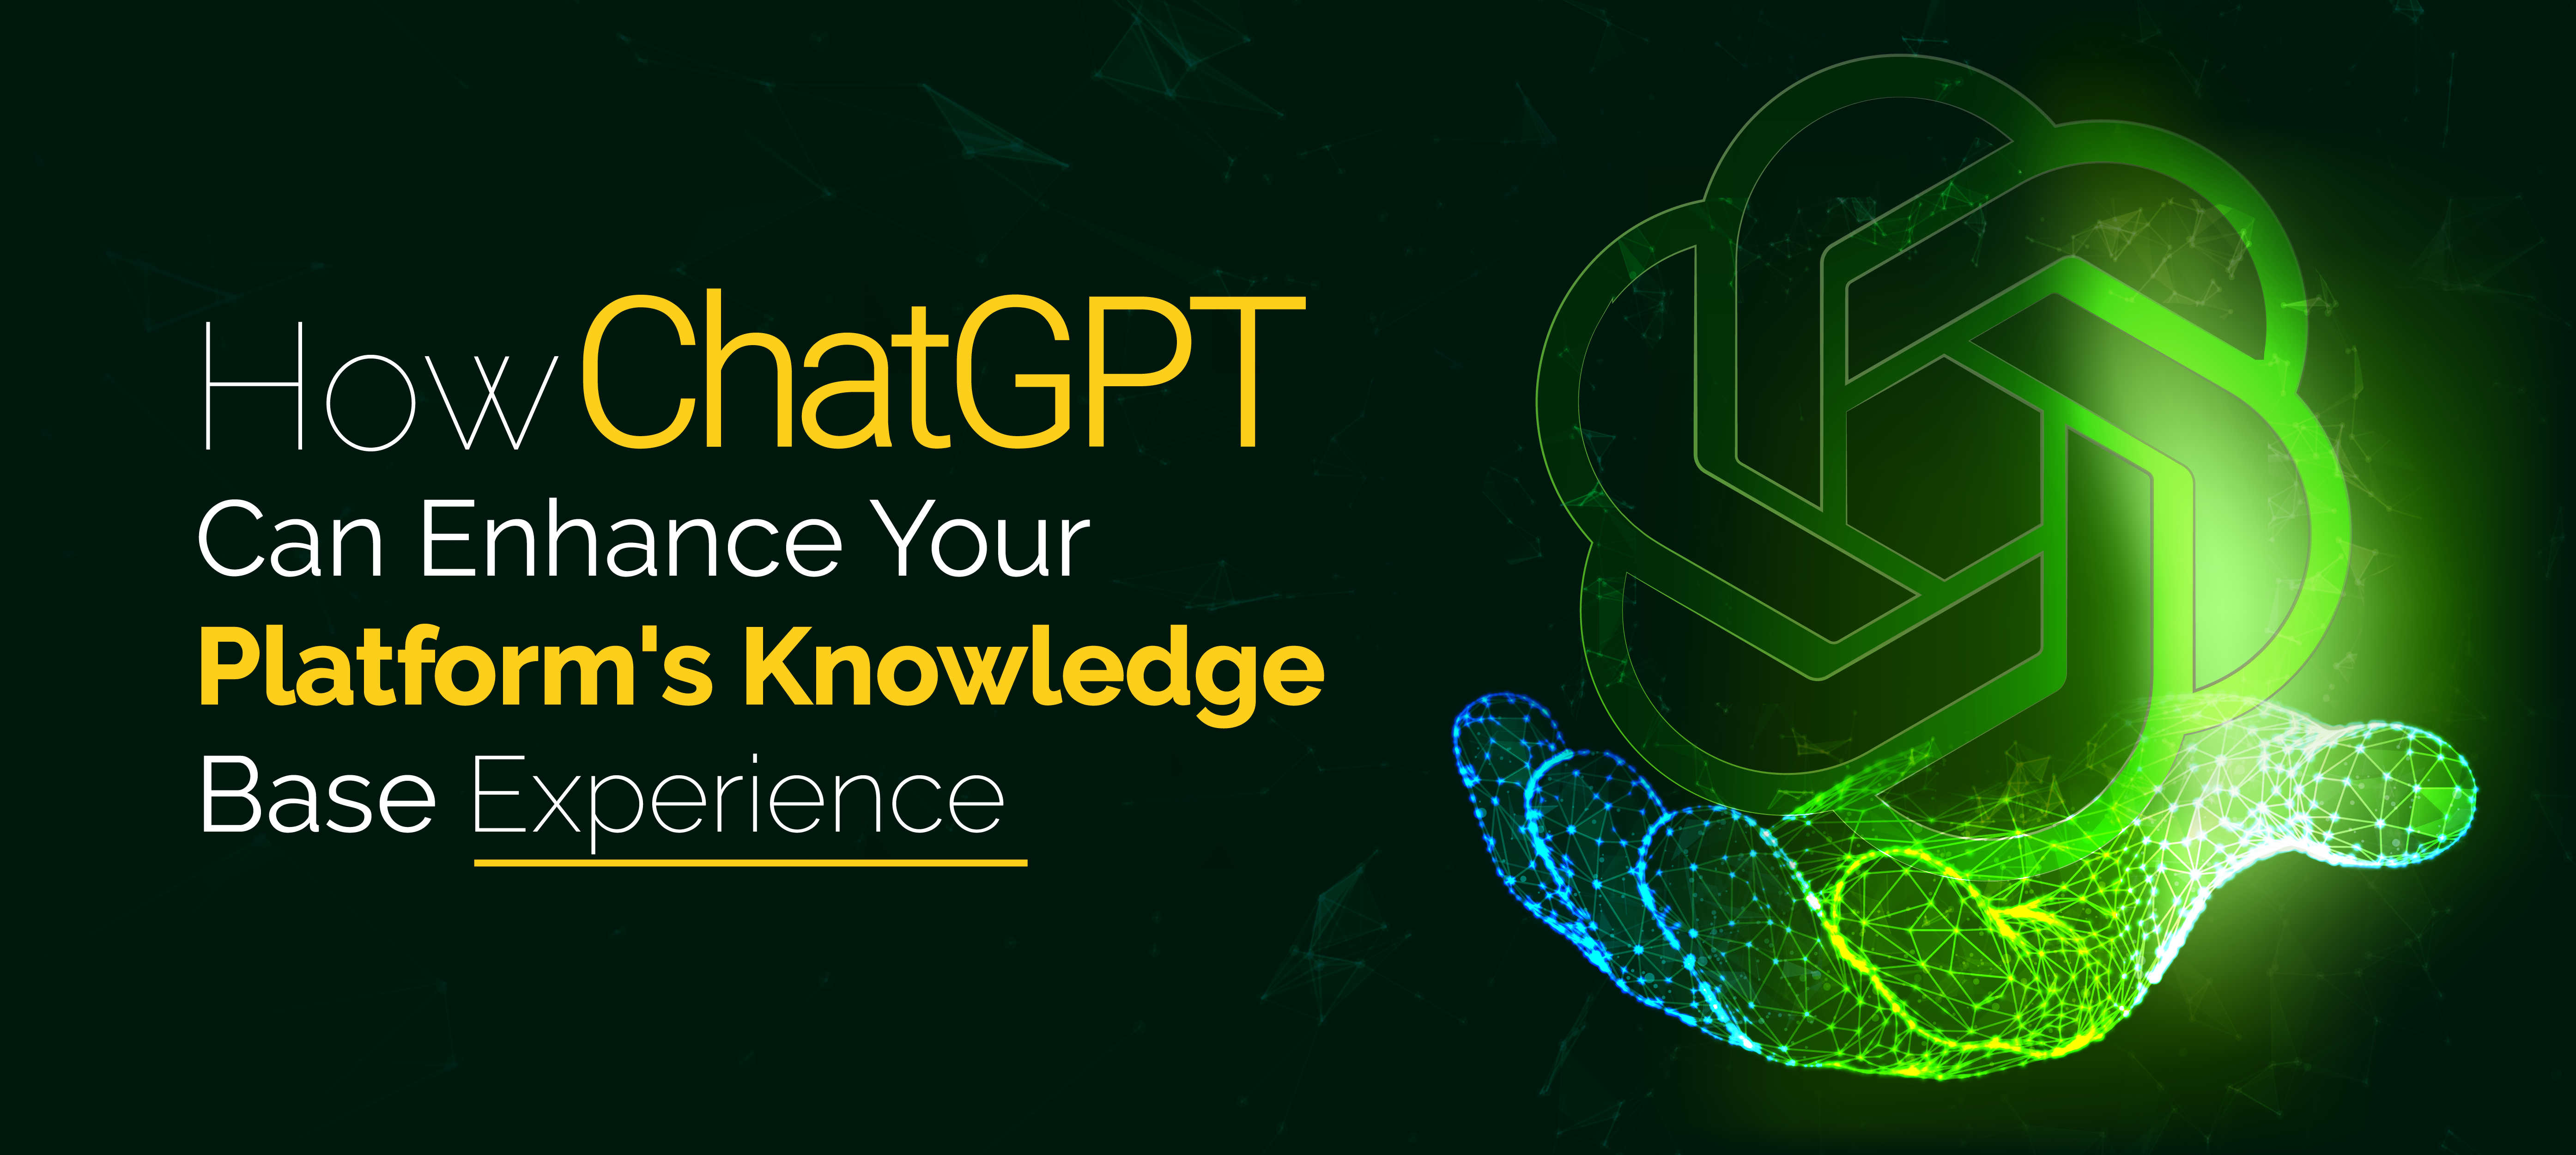 How ChatGPT Can Enhance Your Platform's Knowledge Base Experience